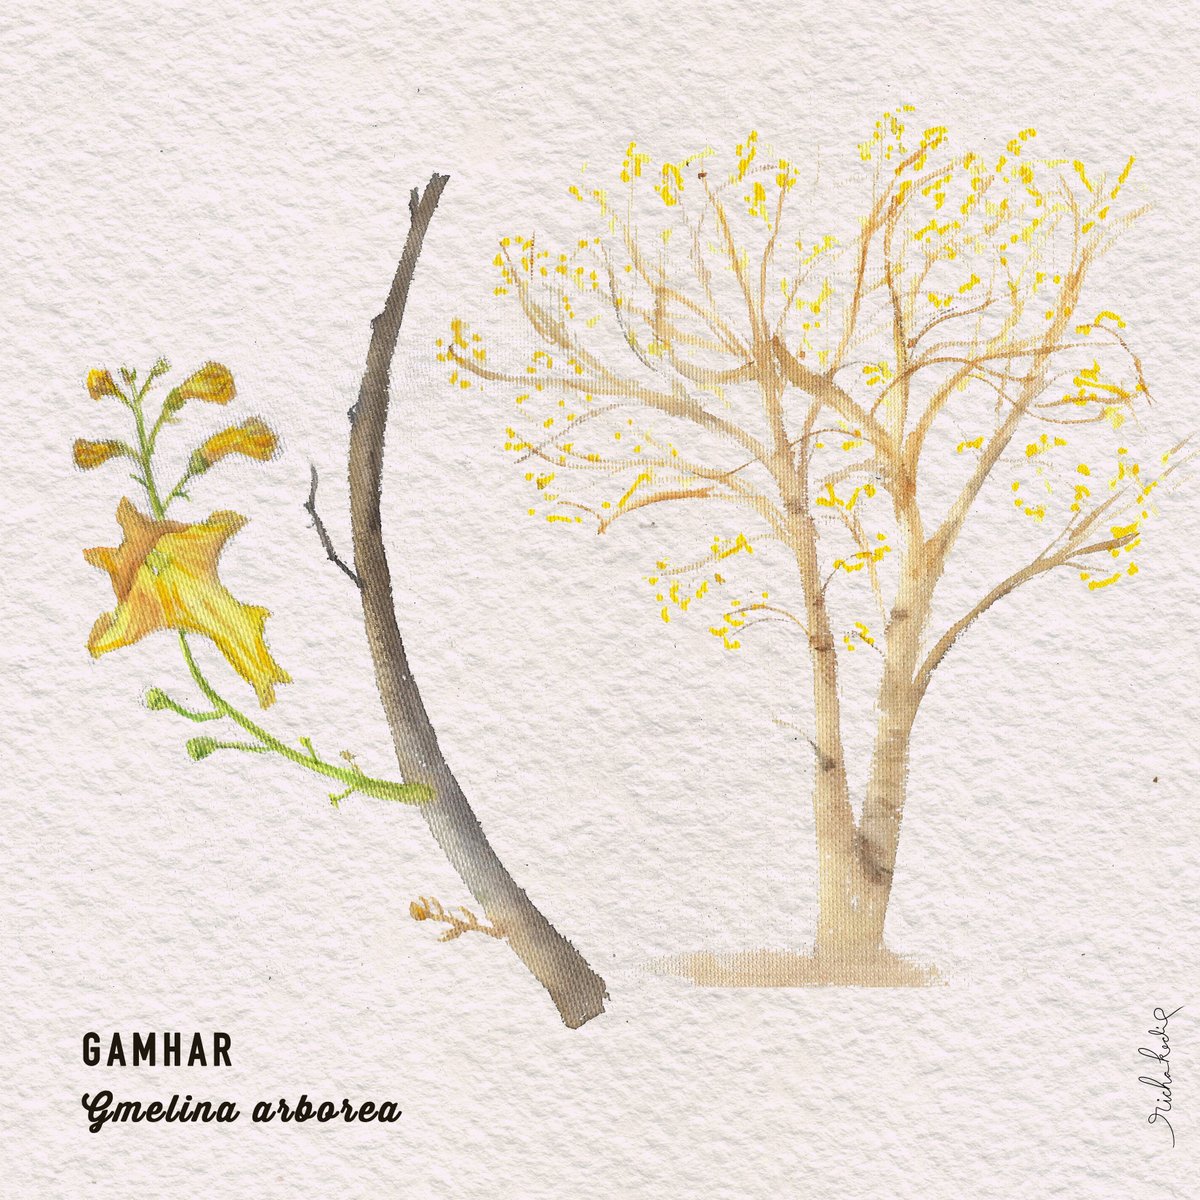 Gamhar tree, is a fast-growing, deciduous tree with a tall, straight trunk and a broad crown. In spring, it has no leaves but clusters of fragrant, yellow flowers, which attract numerous bees and other pollinators. #aravalitrees #treesofindia #botanicalart #indiaves